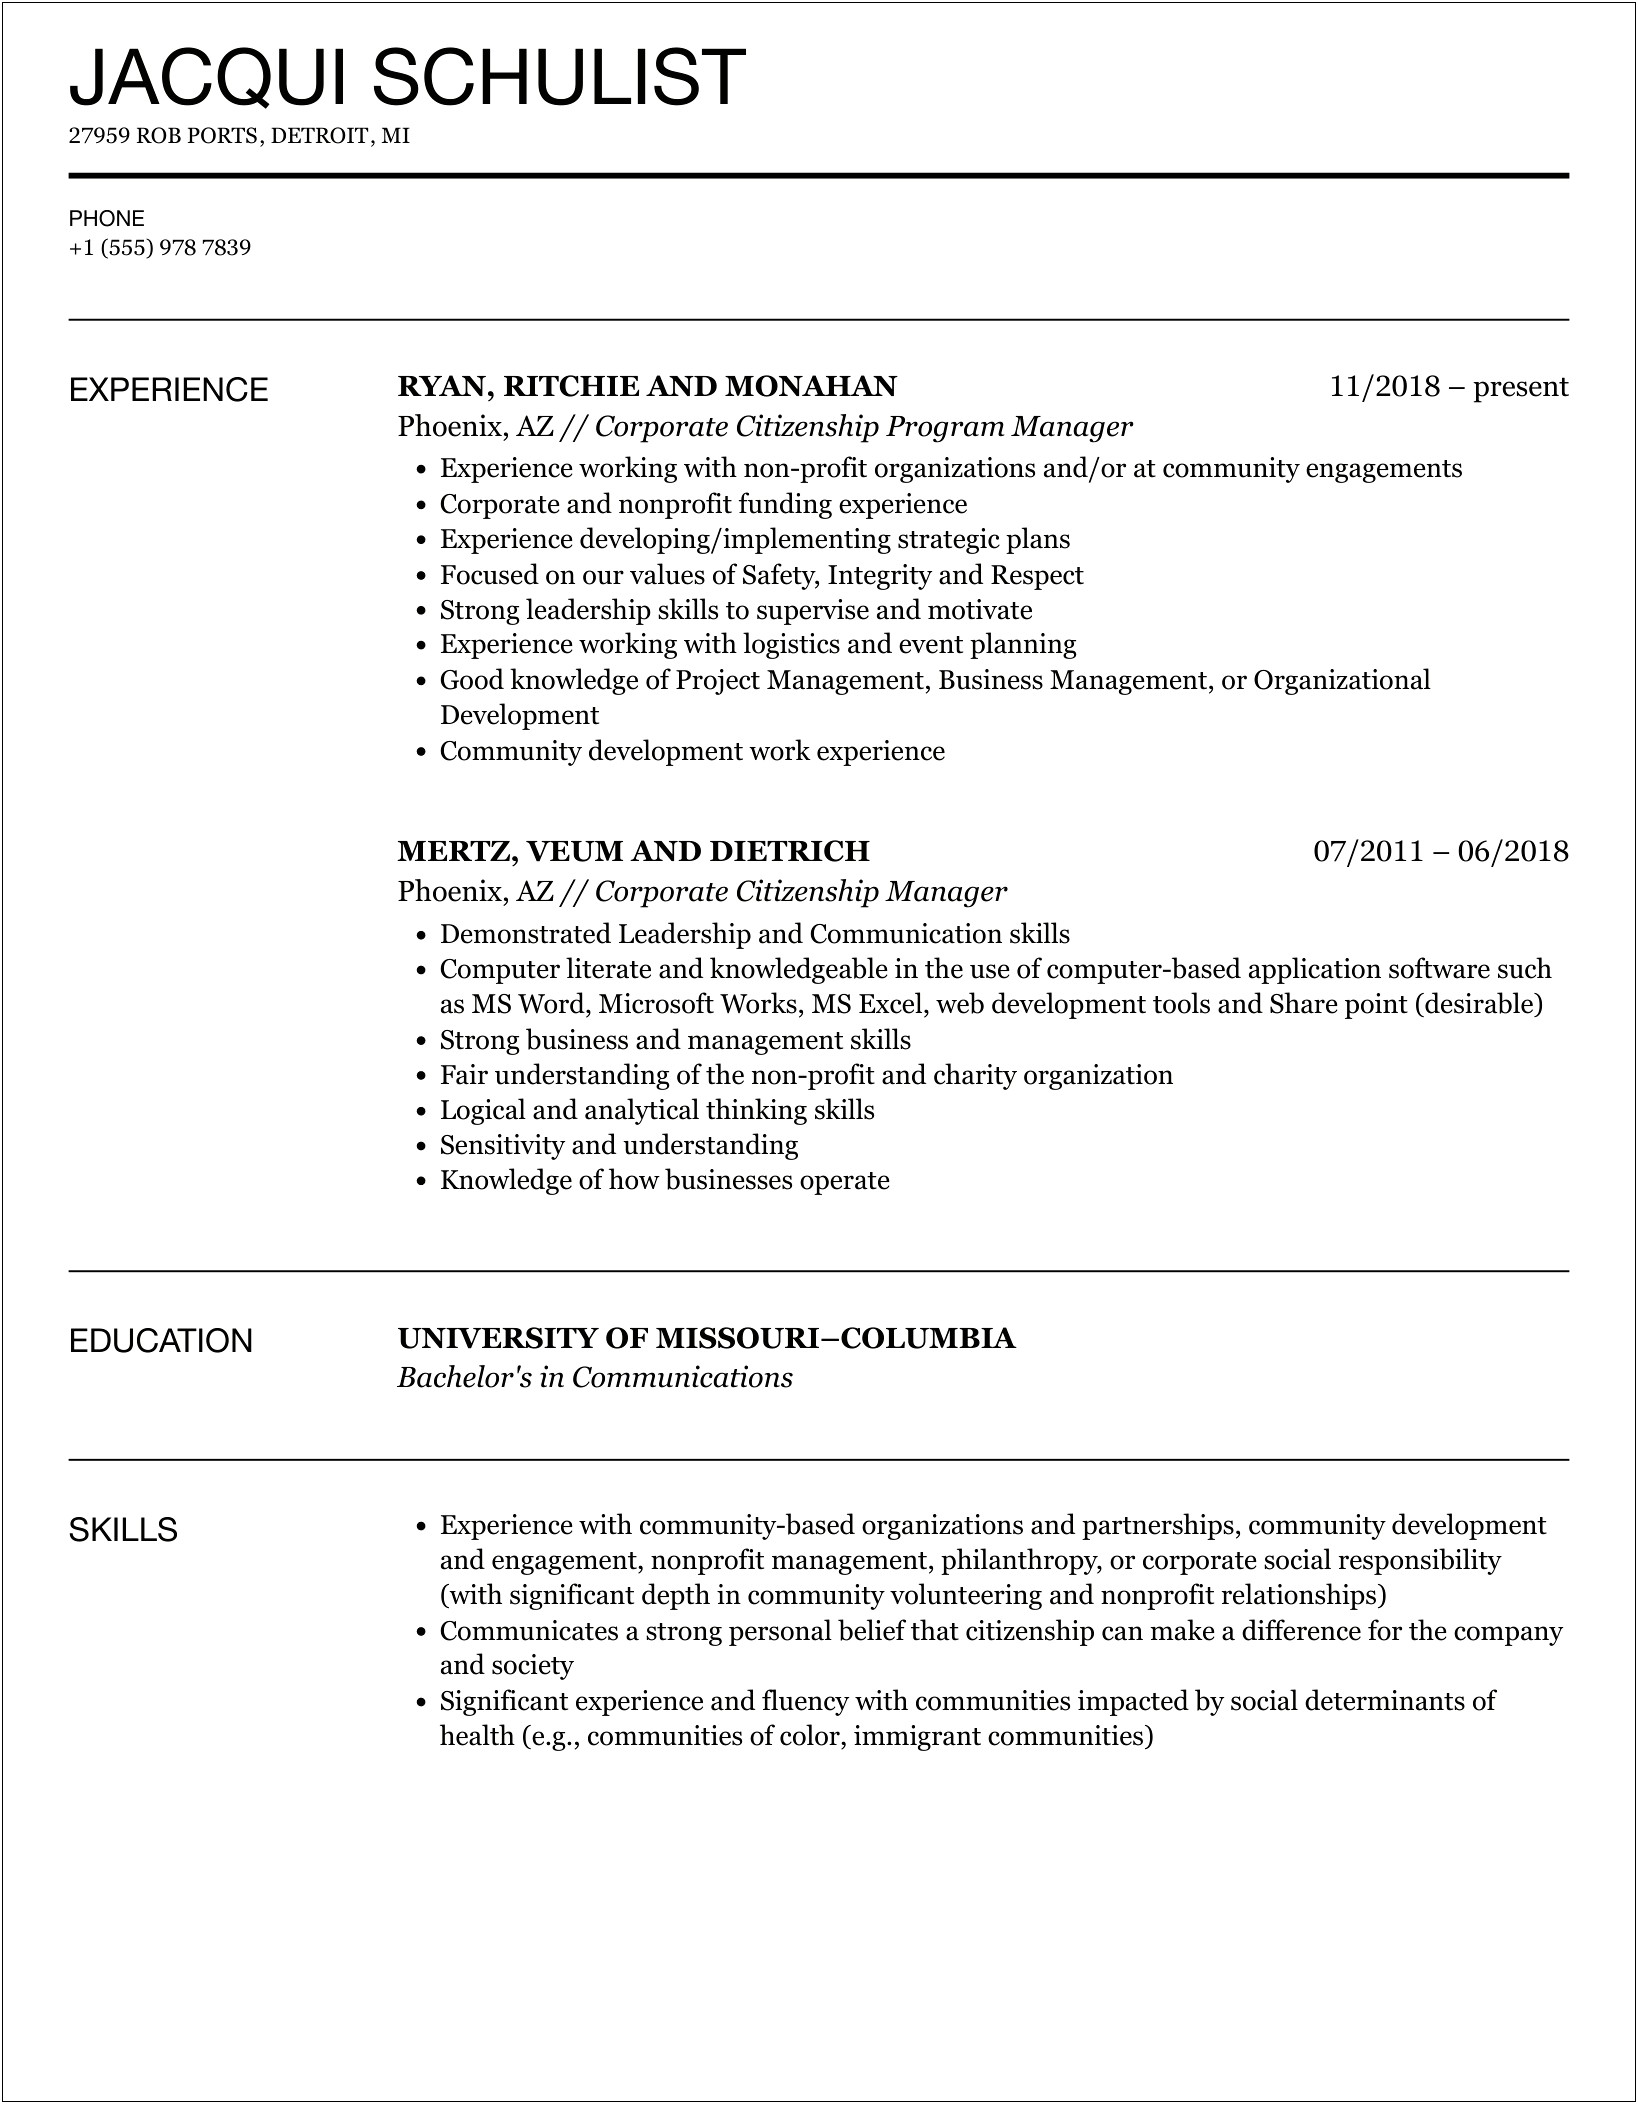 Resume To Work For A Non Profit